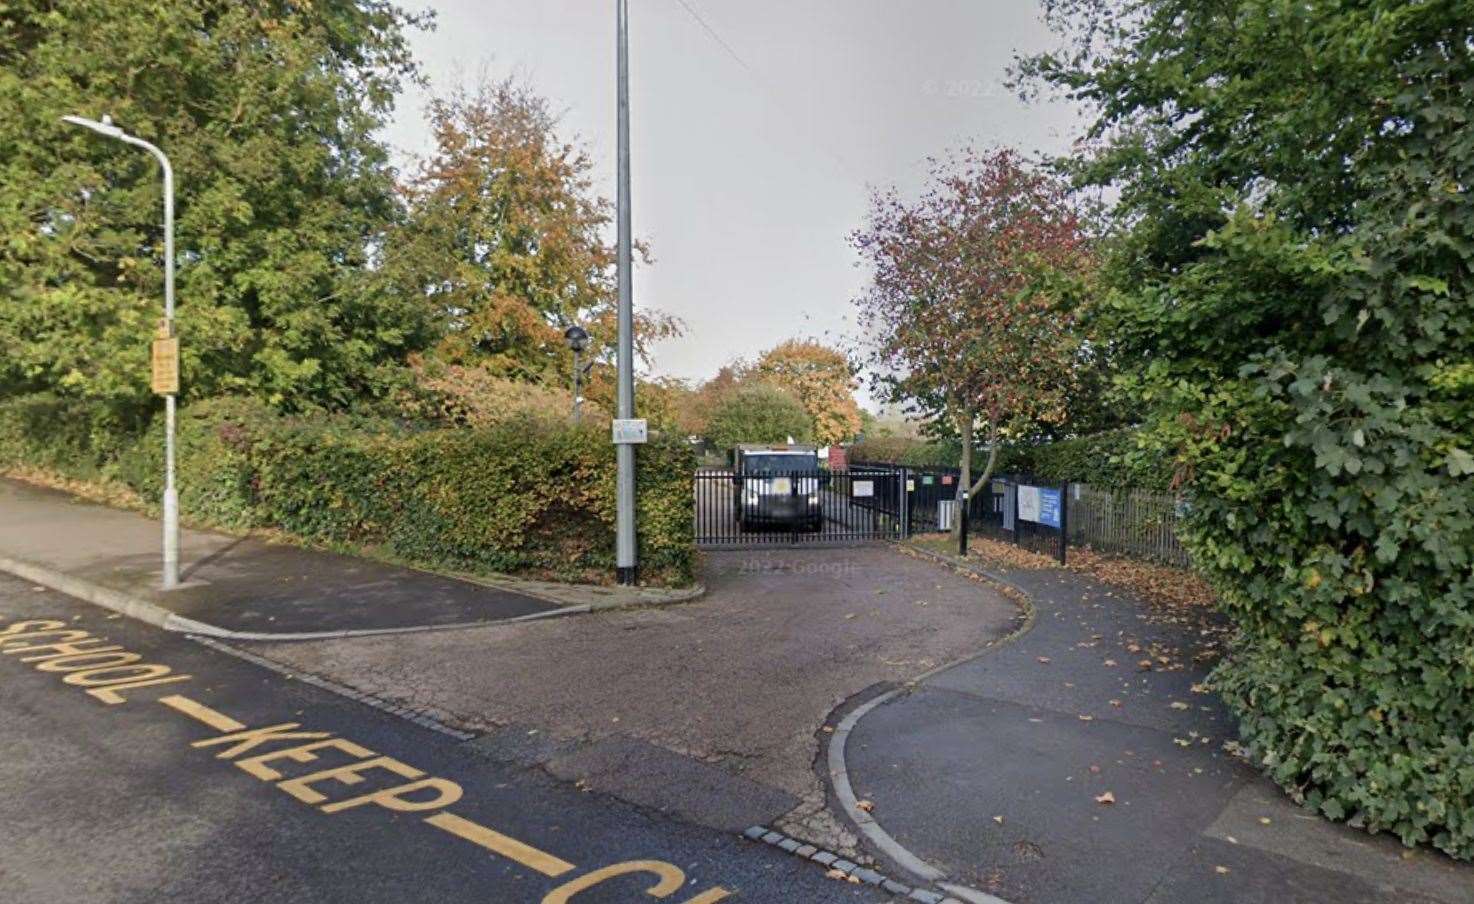 Squirrels Pre-School in Canterbury, on Hales Drive, has been rated ‘Inadequate’ by Ofsted. Photo: Google Street View